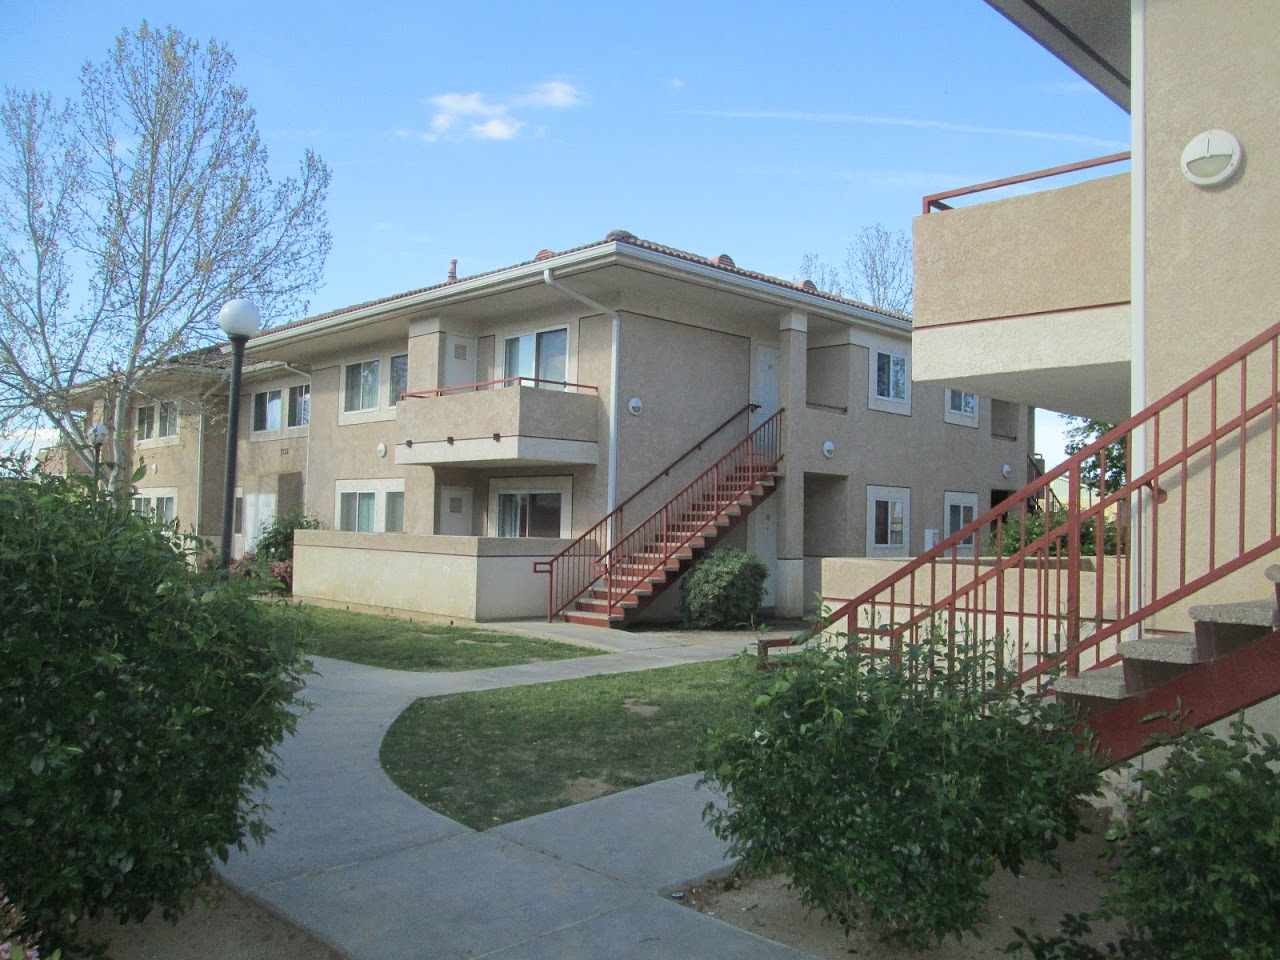 Photo of CASA DE LA PALOMA (ARVIN). Affordable housing located at 1301 HAVEN DR ARVIN, CA 93203